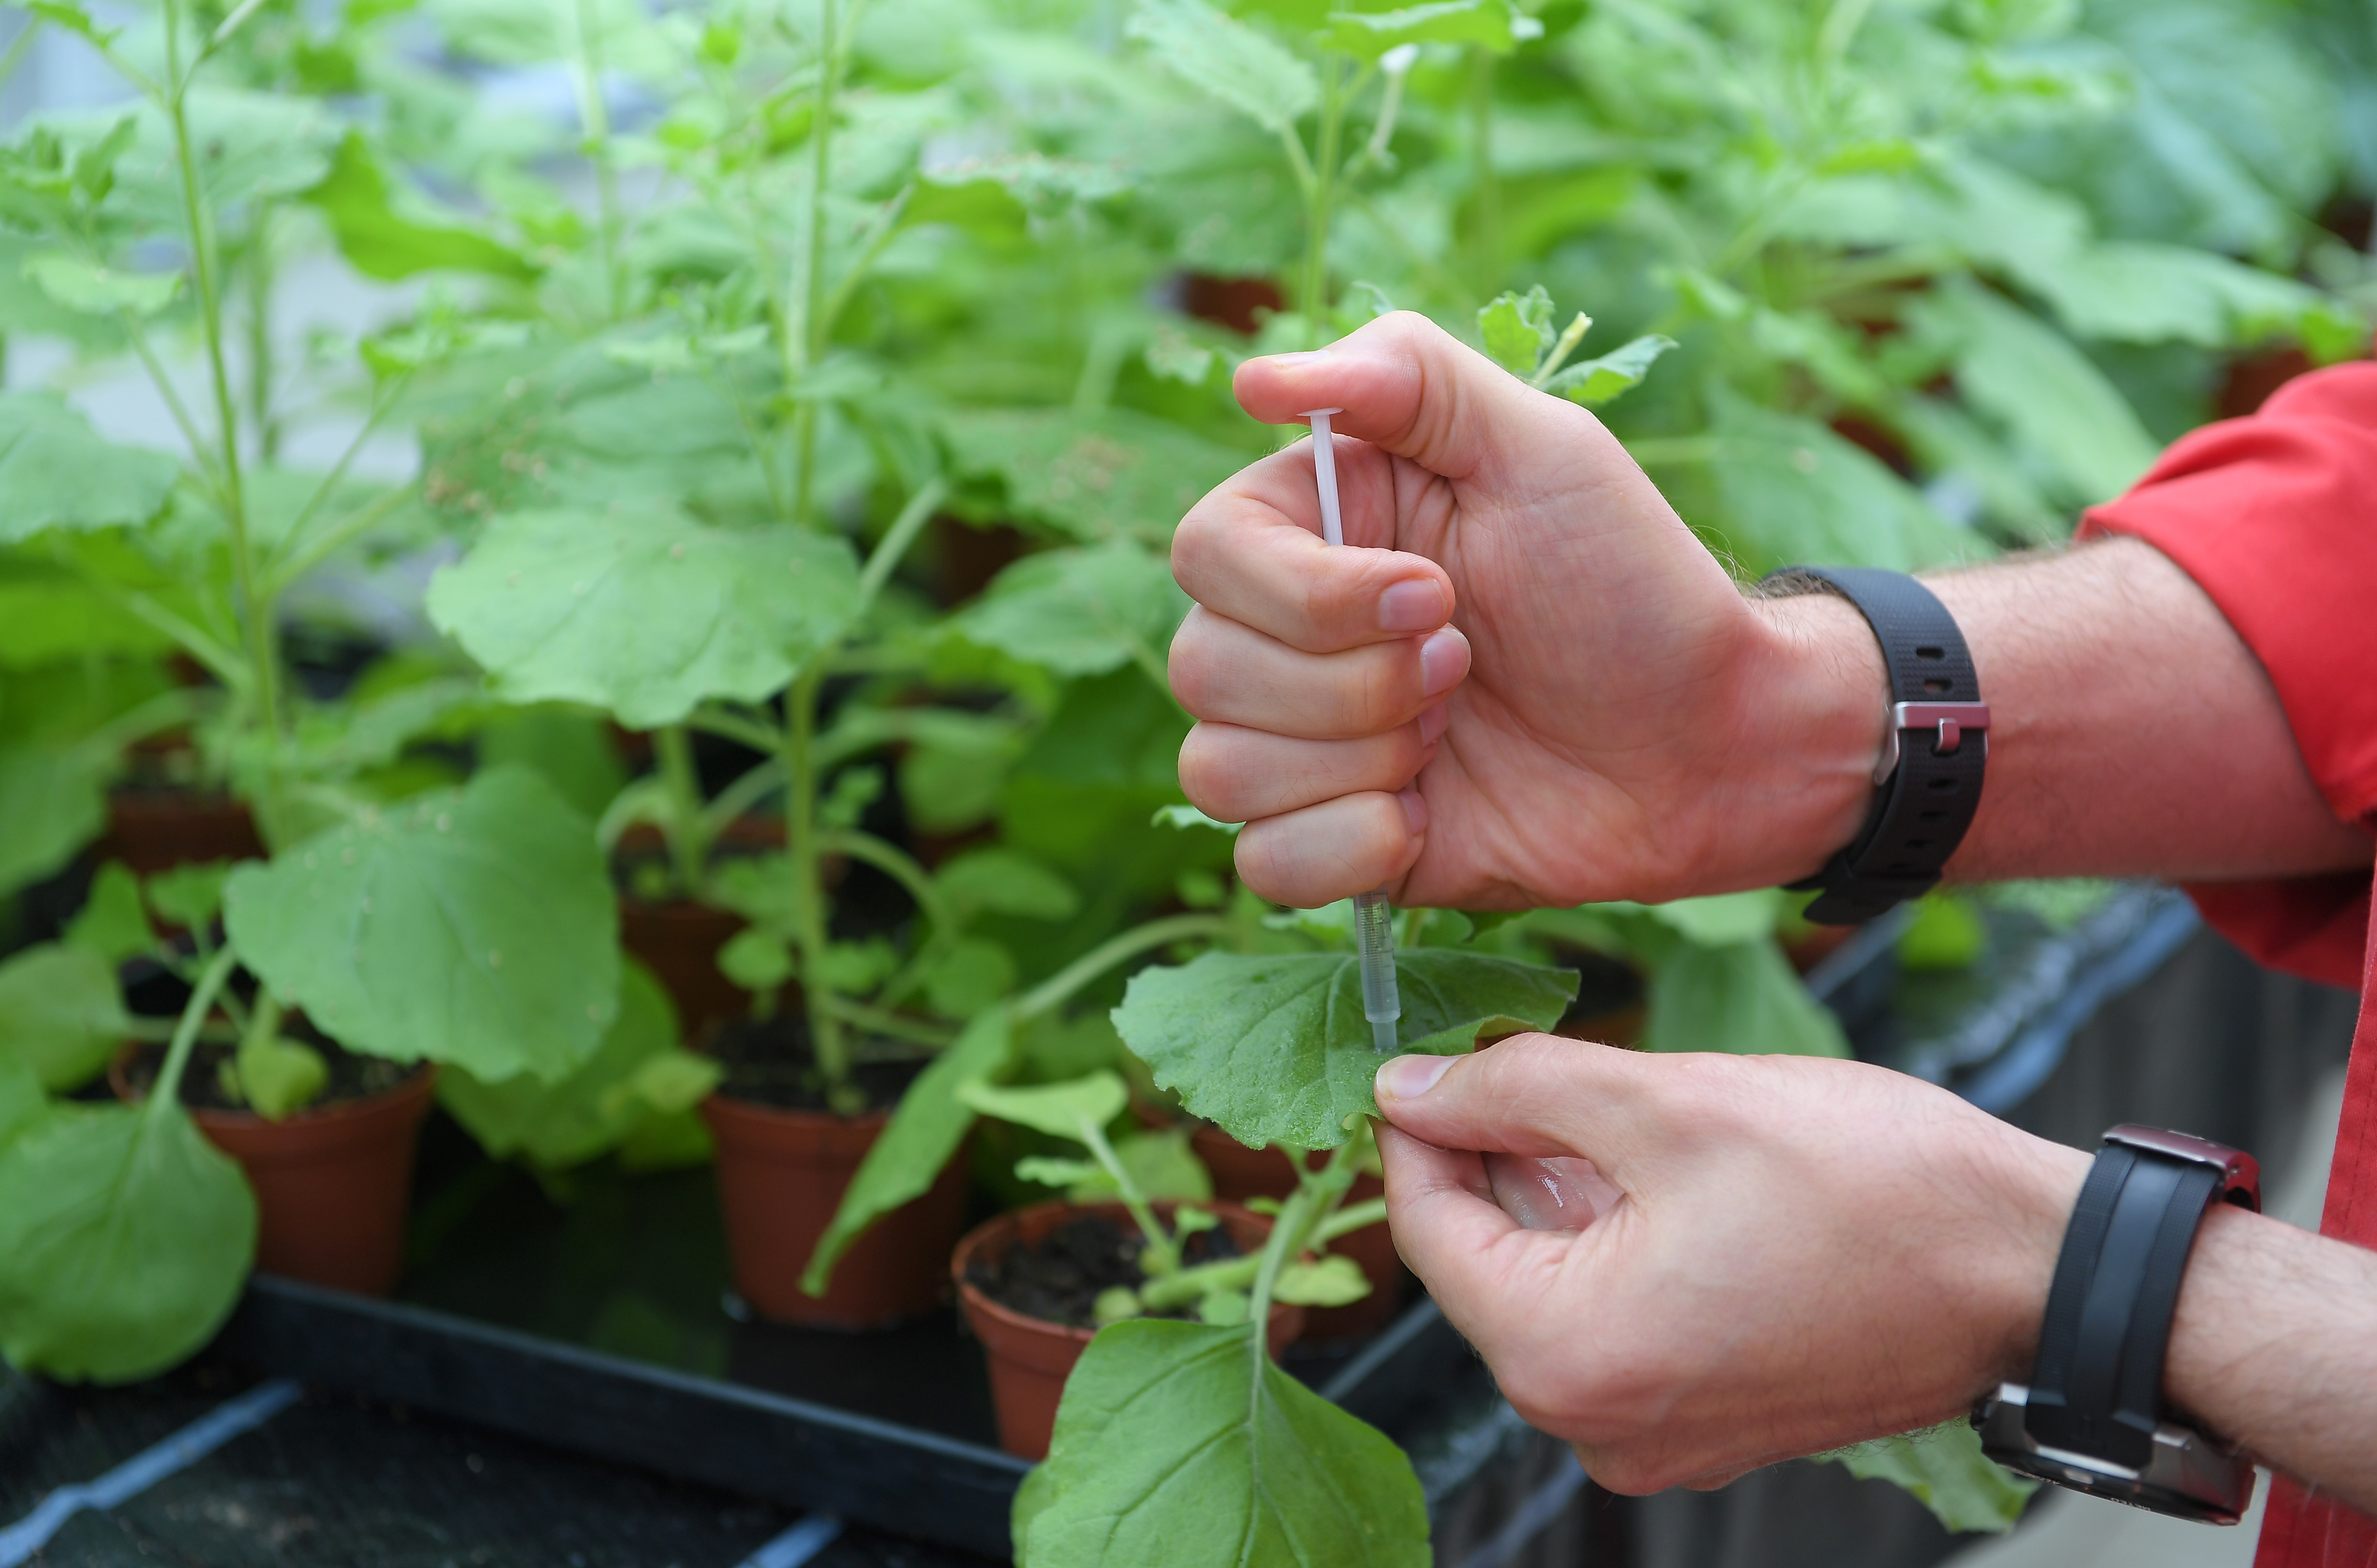 Scientists manage to synthesize cocaine from a genetically modified tobacco plant